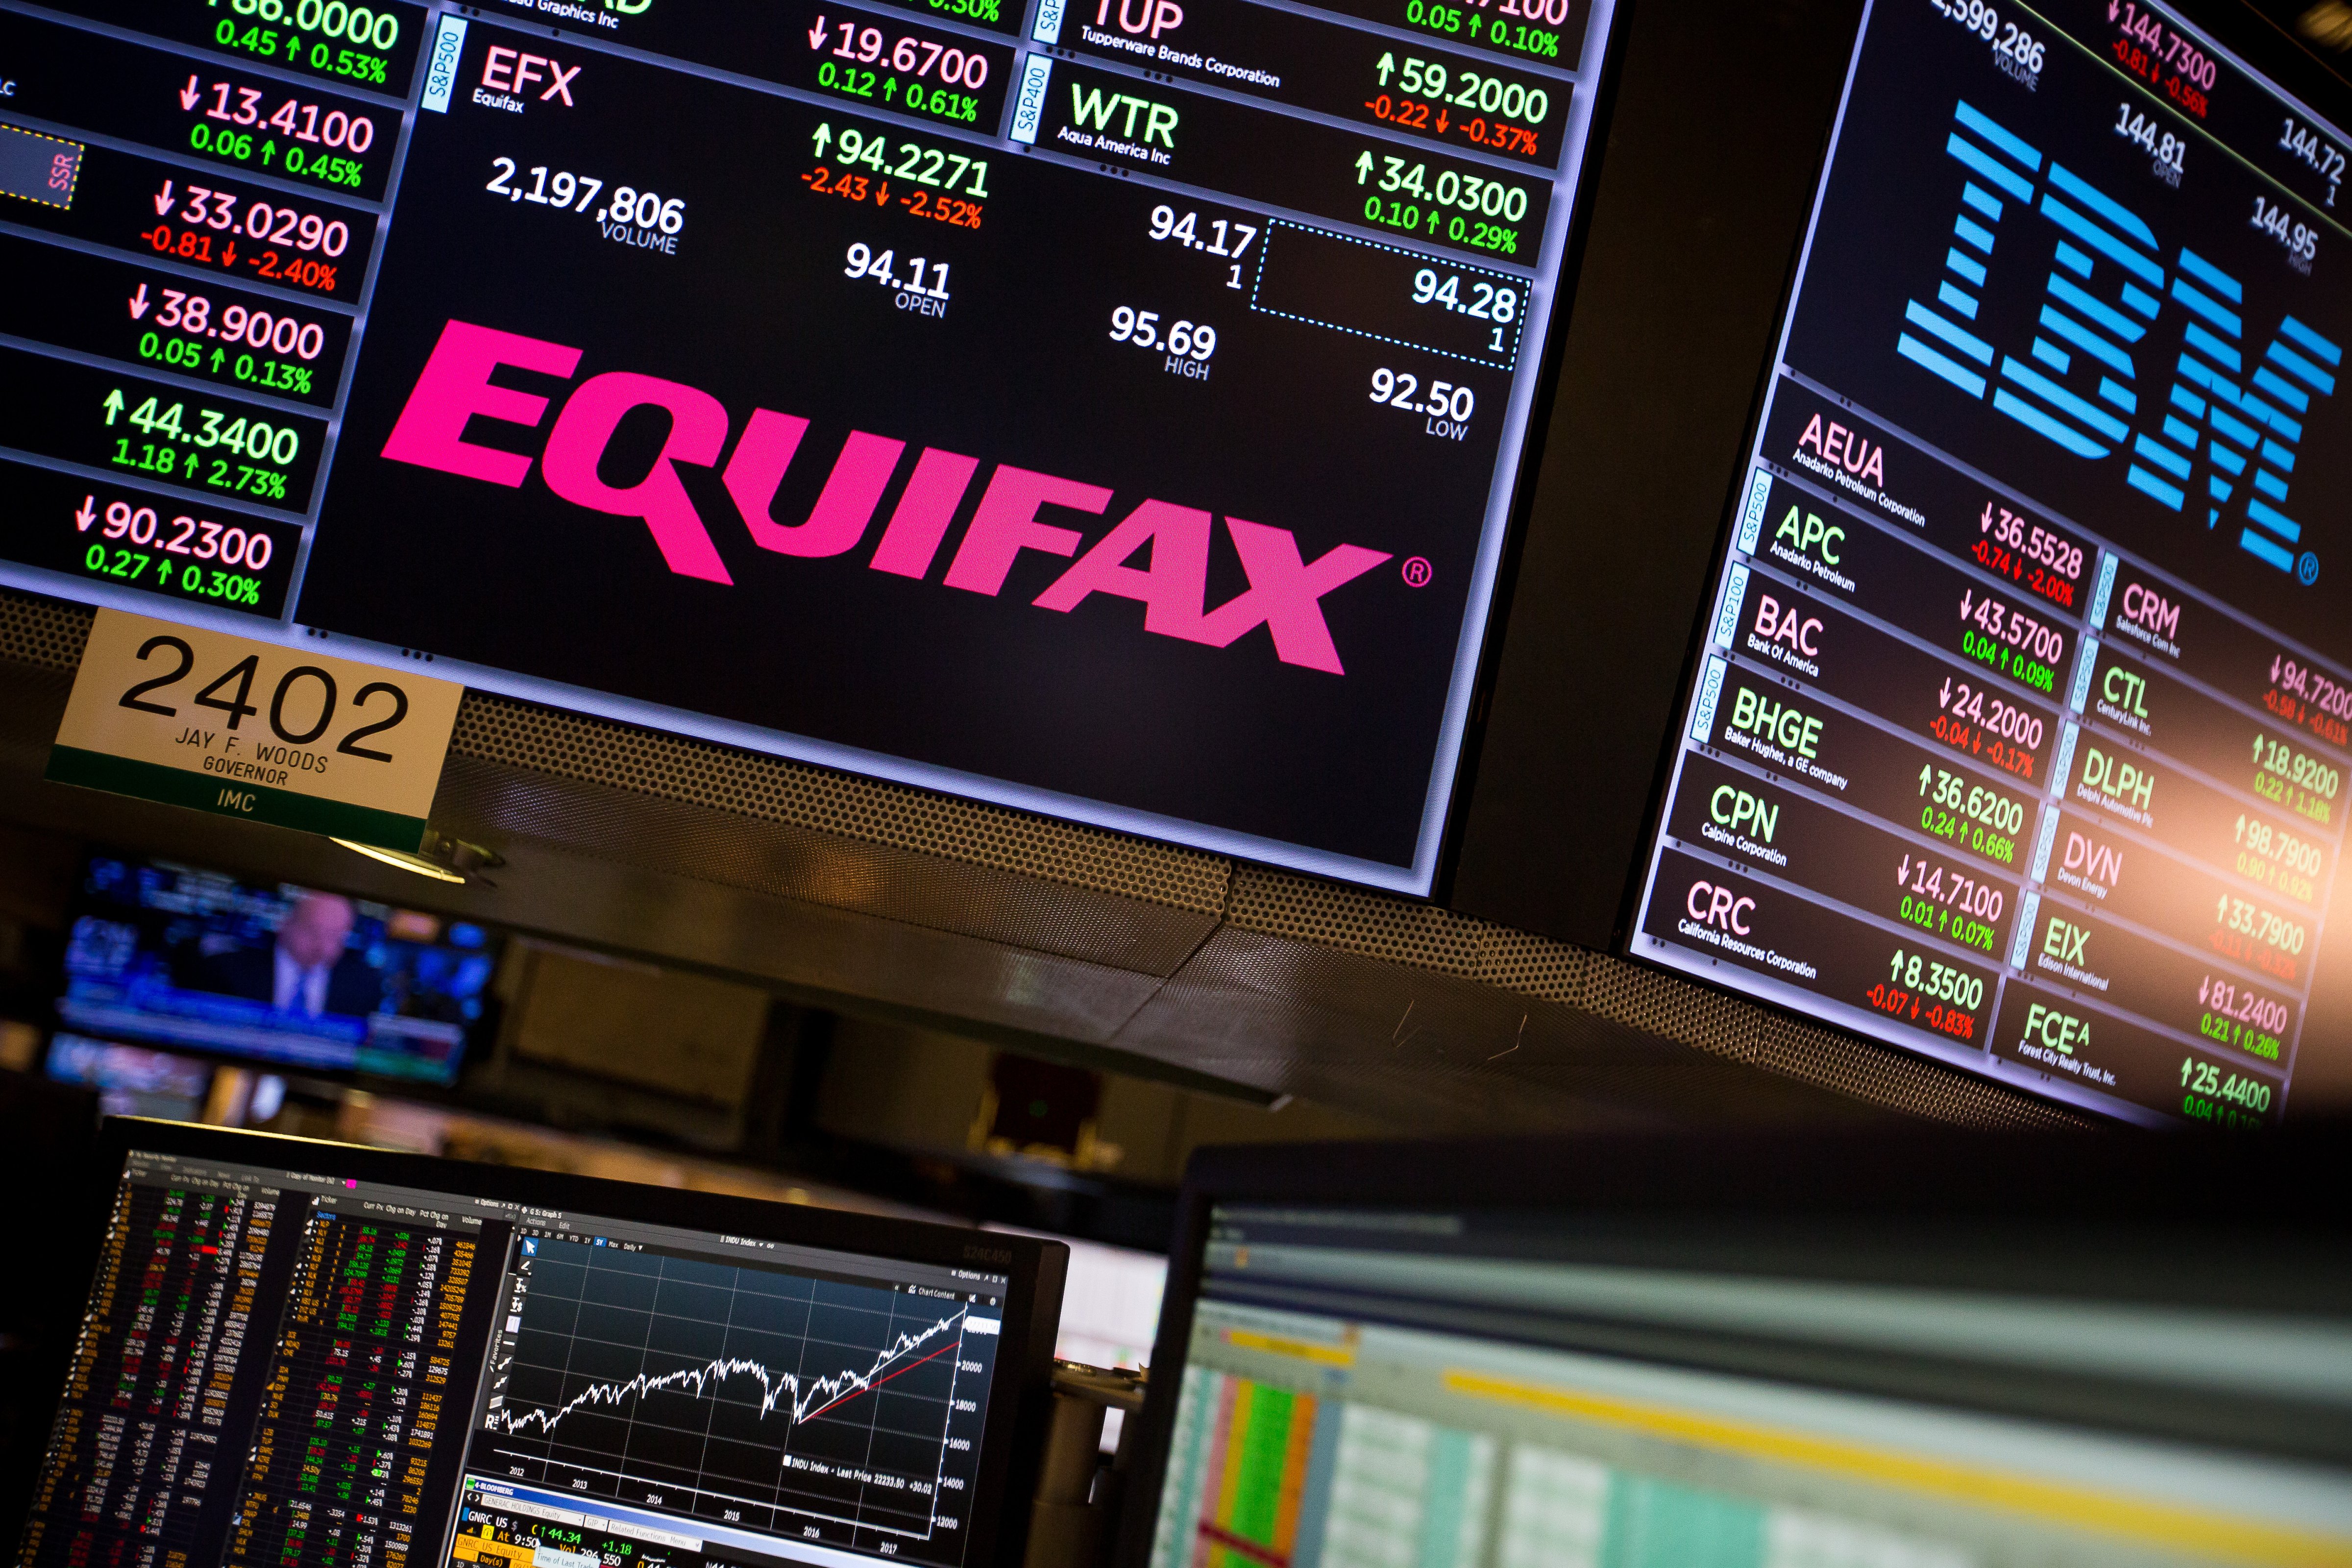 A monitor displays Equifax Inc. signage on the floor of the New York Stock Exchange (NYSE) in New York, Sept. 15, 2017. (Michael Nagle—Bloomberg/Getty Images)